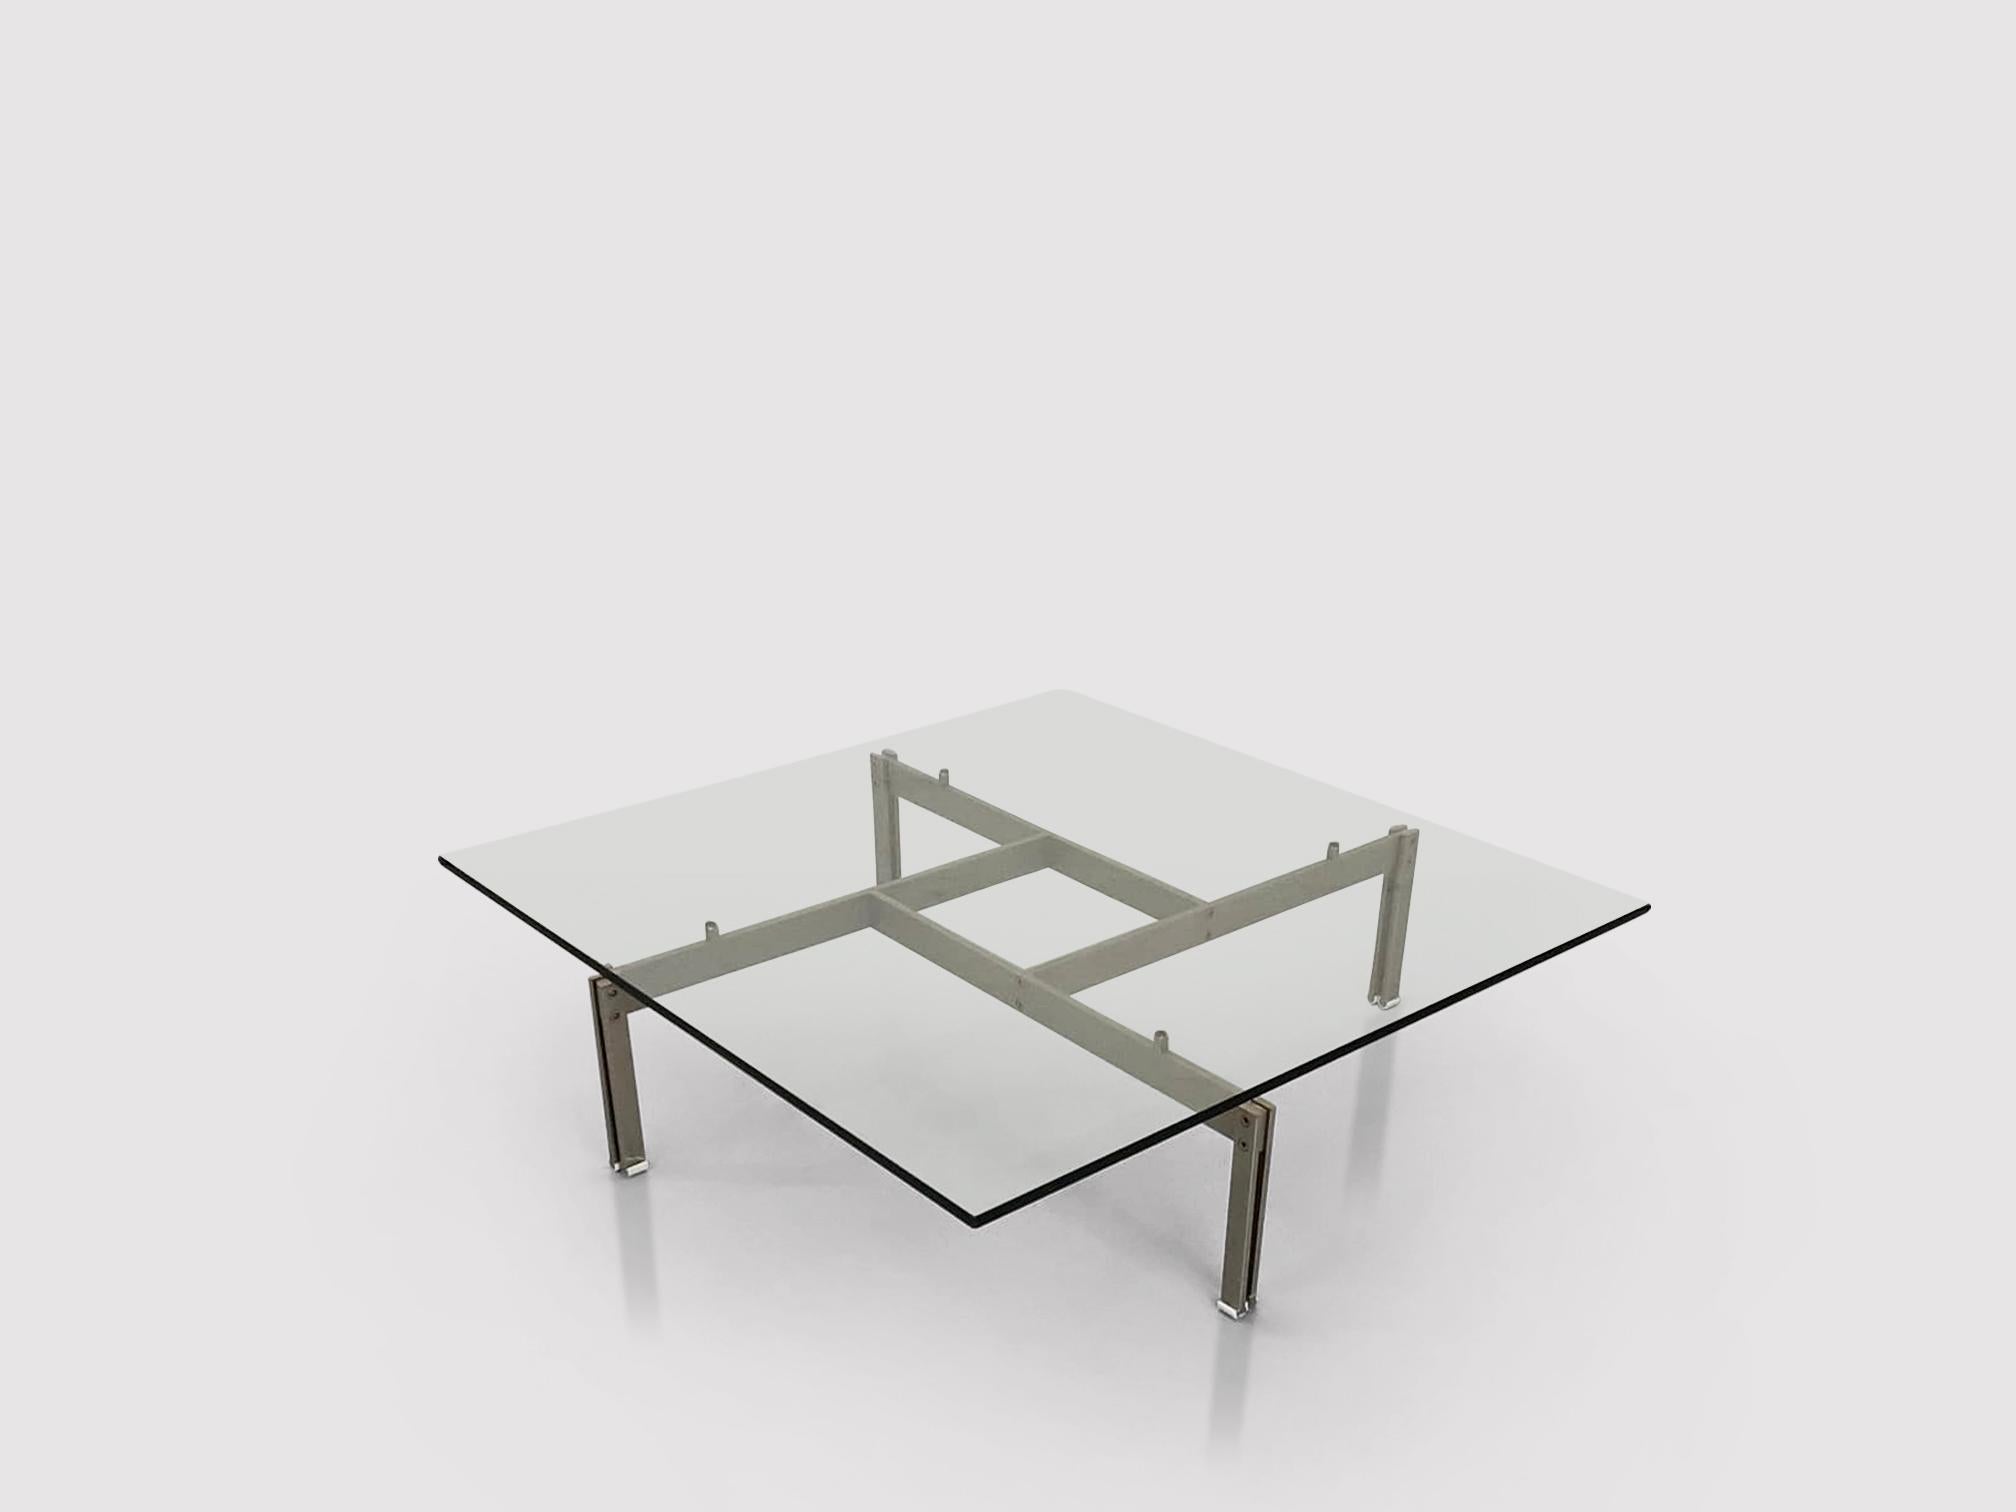 Late 20th Century Onda Brushed Steel and Glass Coffee Table by Giovanni Offredi for Saporiti 1970s For Sale